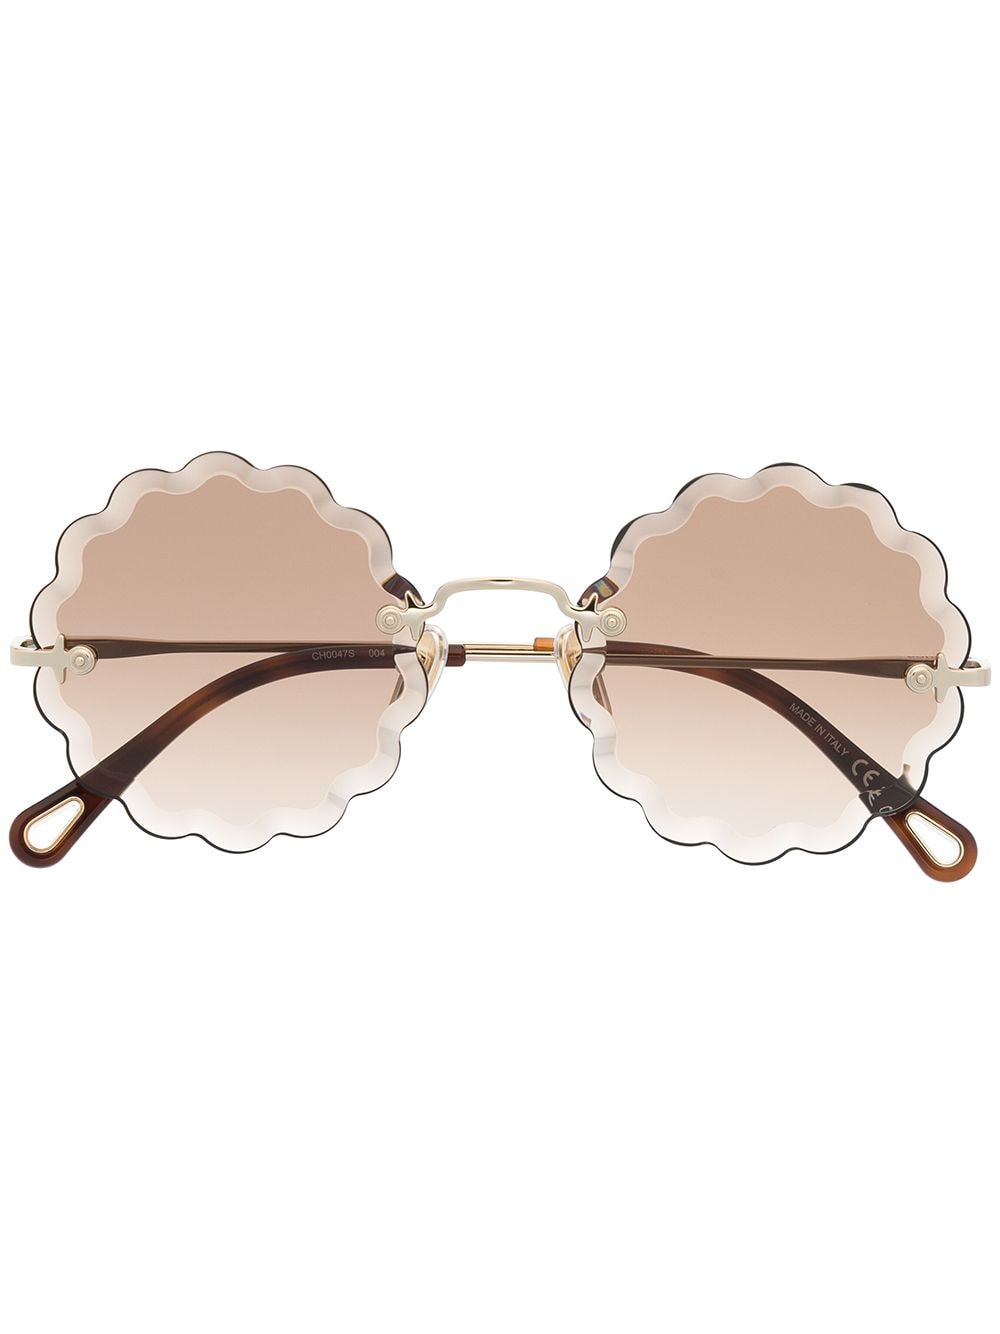 Image 1 of Chloé scalloped round frame sunglasses